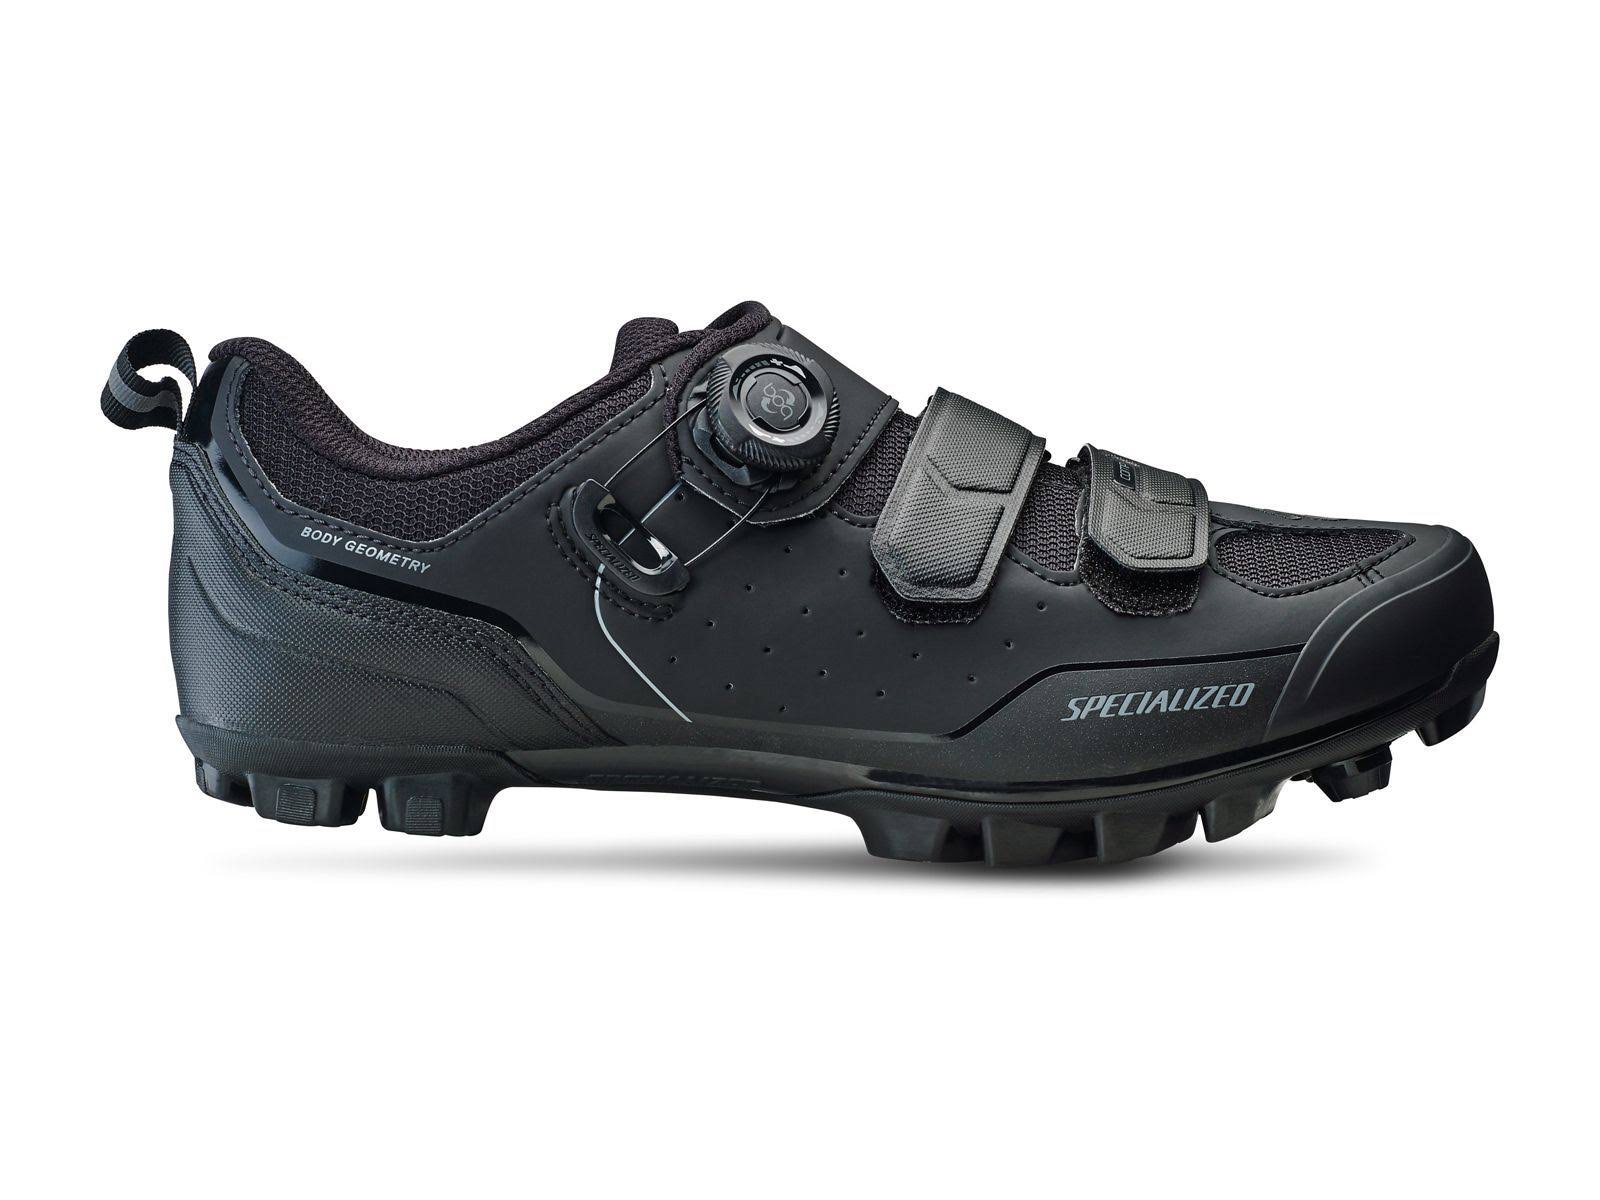 Specialized Comp Cycling Shoes - Black and Dark Grey, 9.5 US